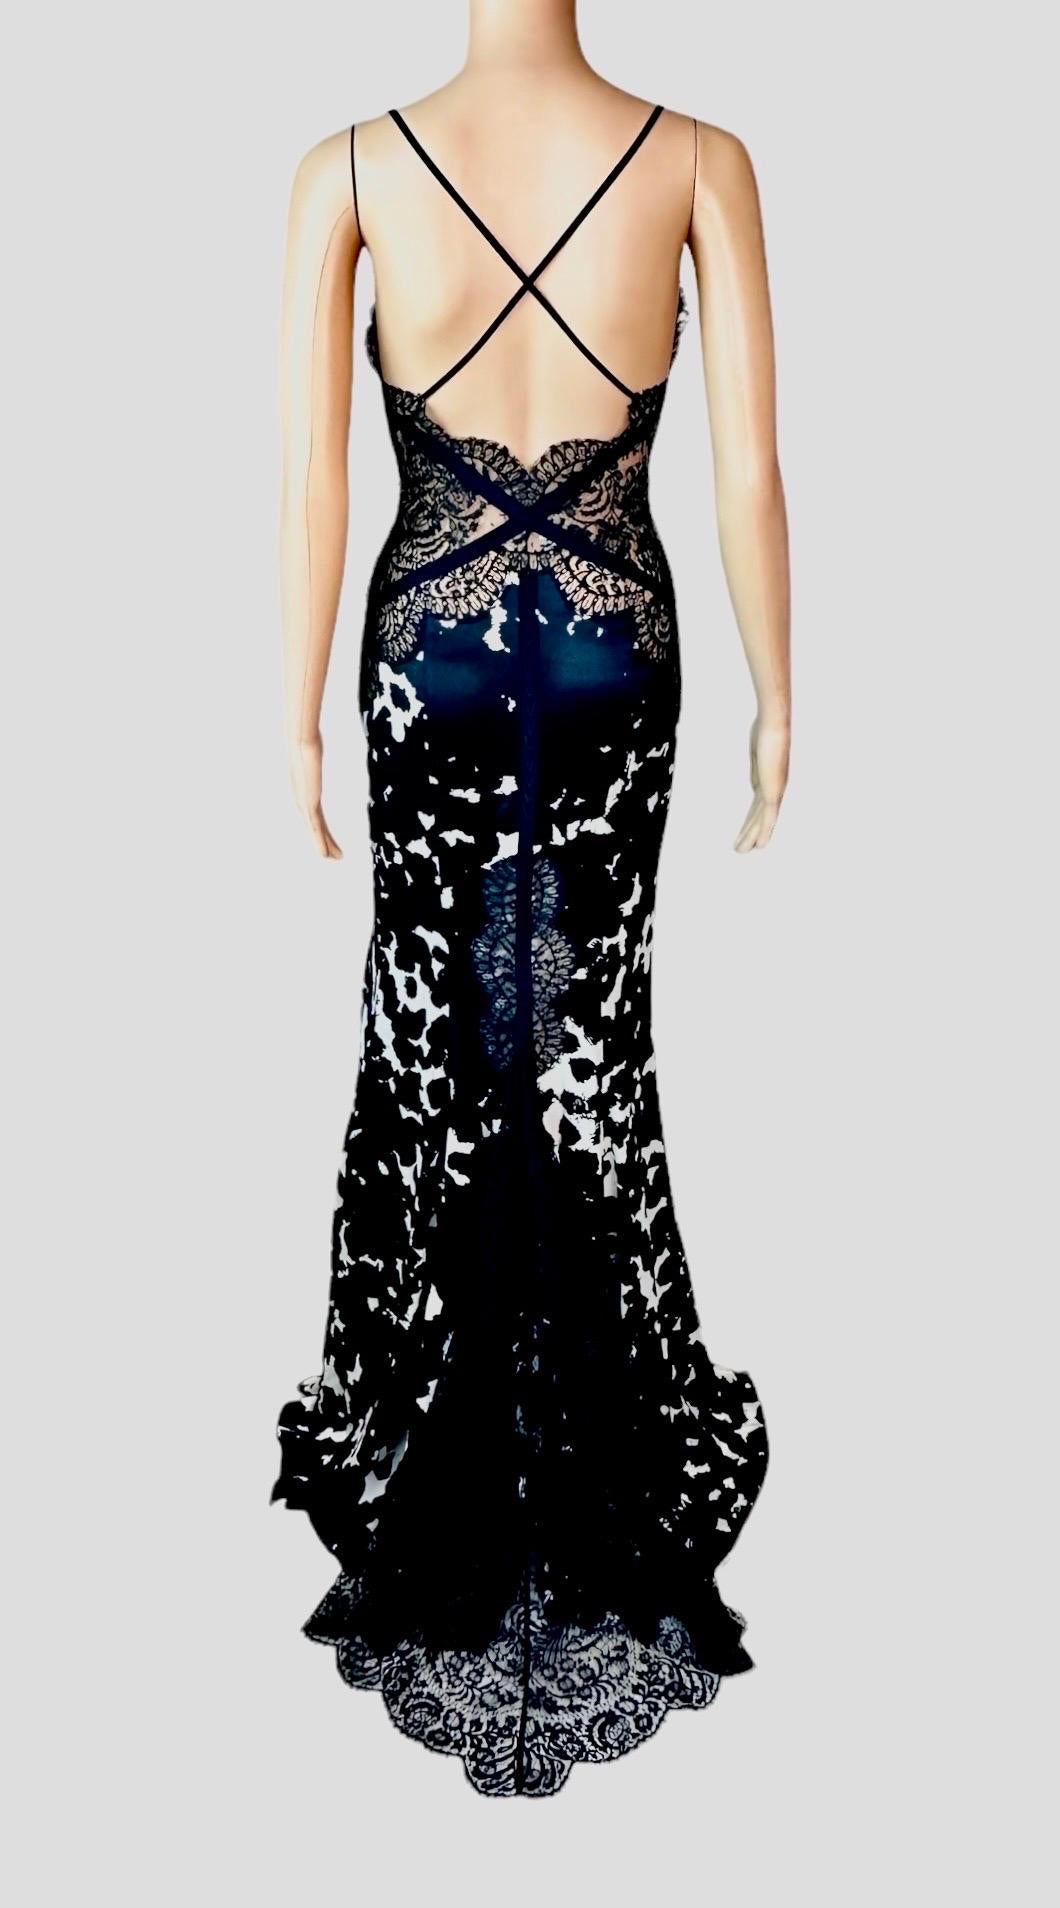 Versace Plunged Sheer Lace Panels Backless Train Evening Dress Gown  5